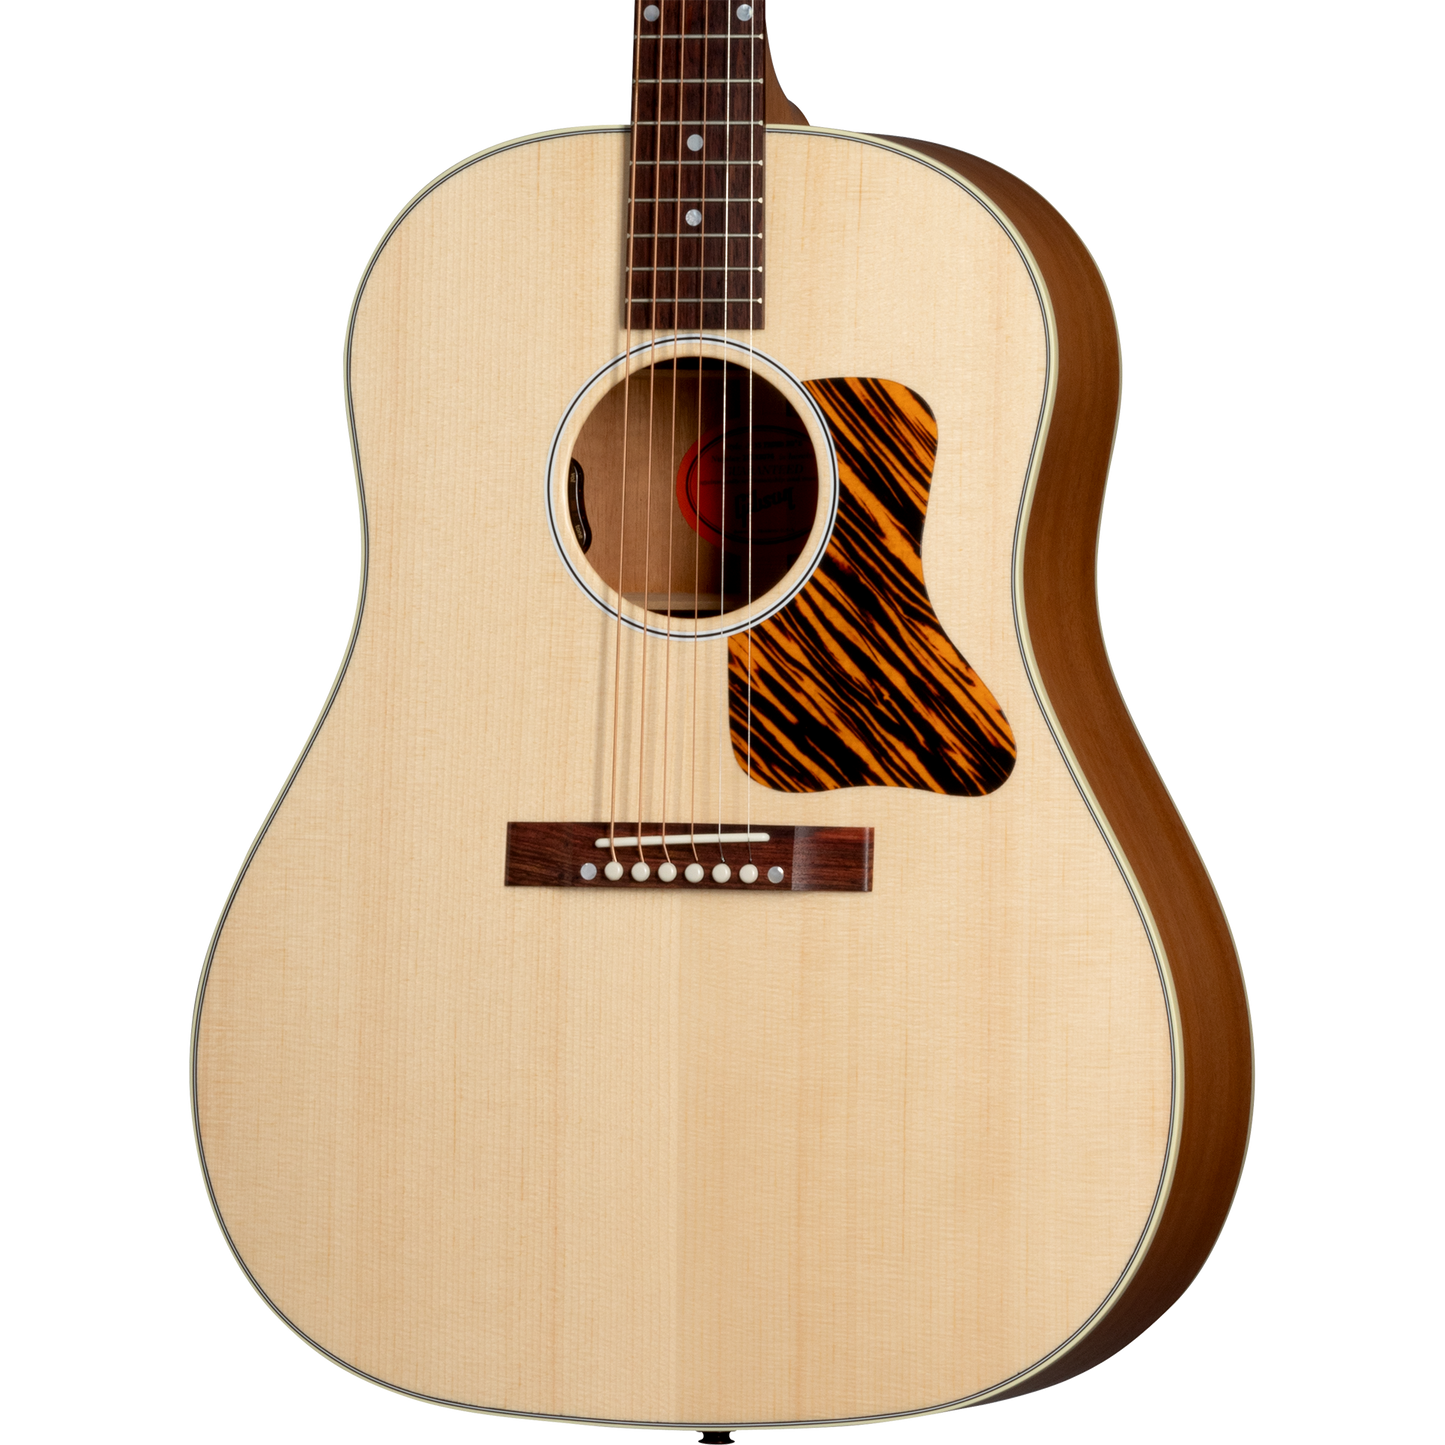 Gibson J-35 Faded 30’s Acoustic Guitar - Antique Natural